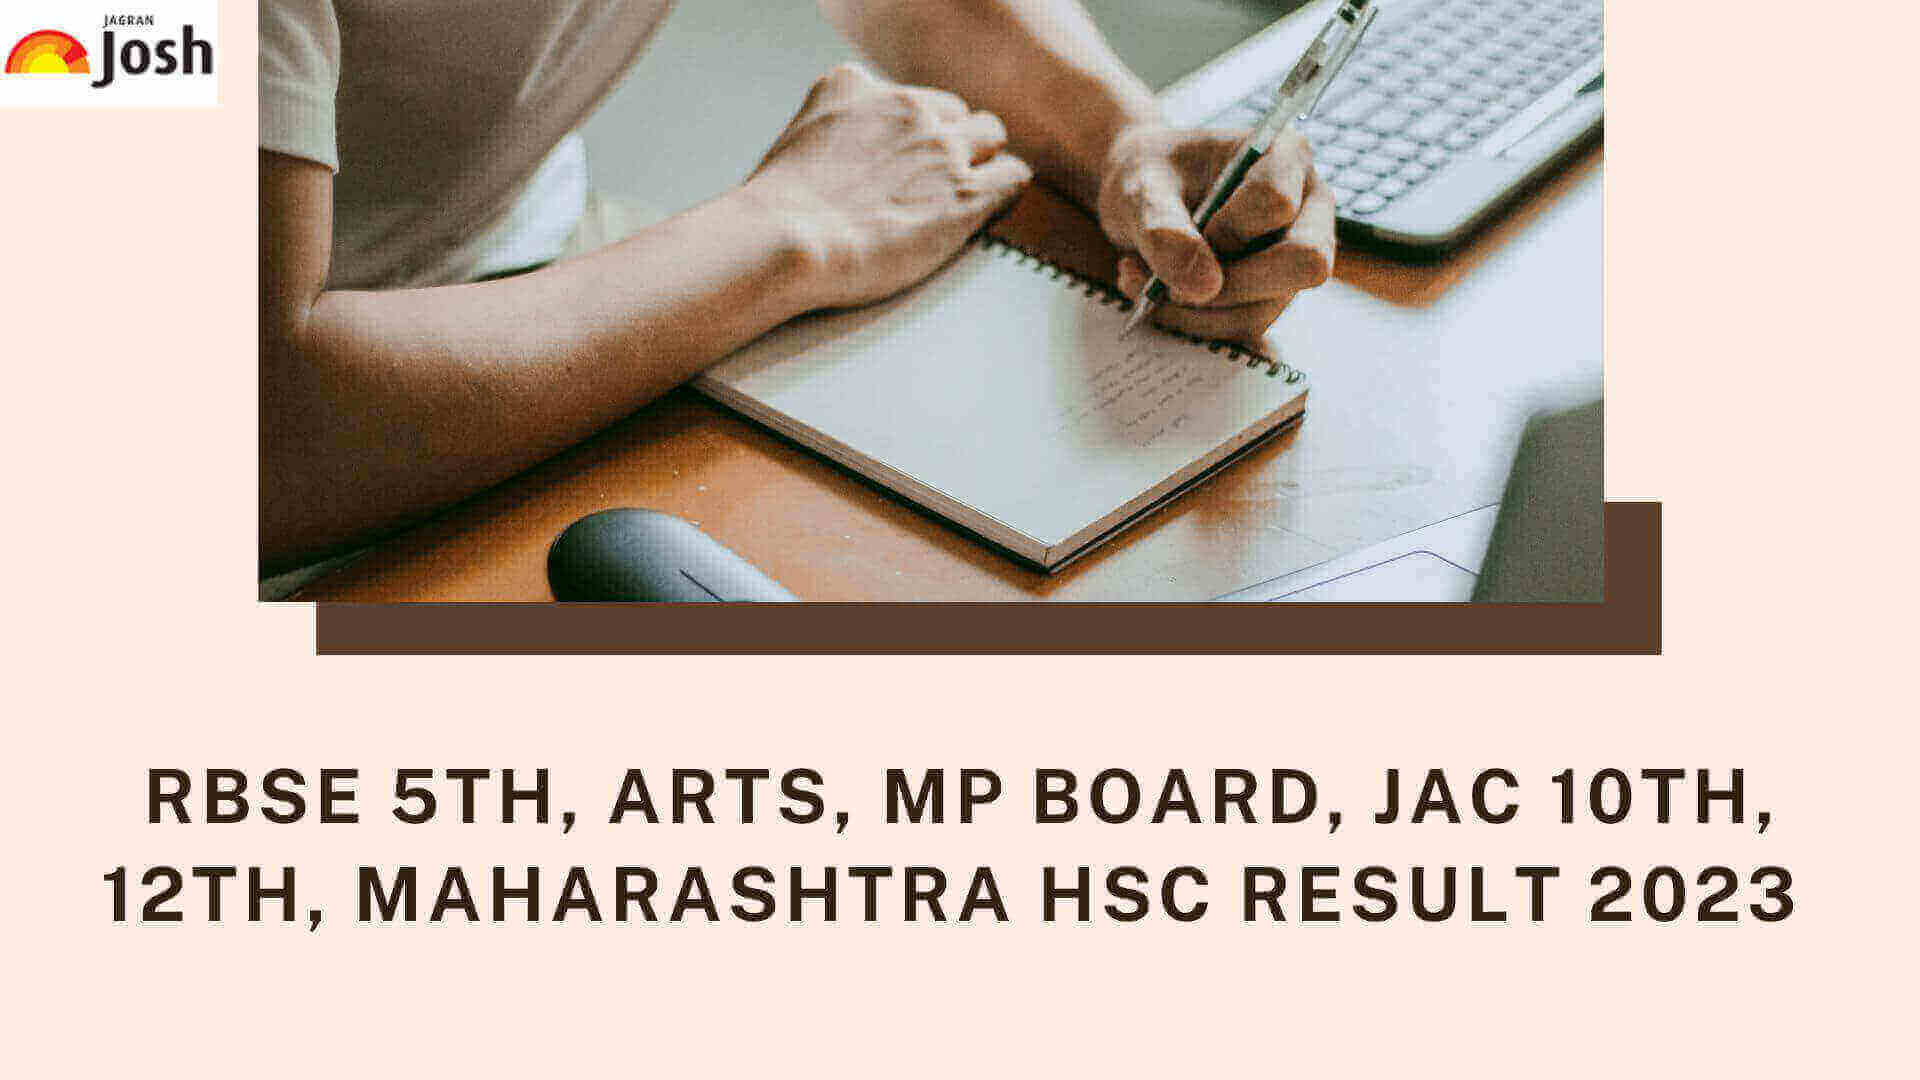  Get here latest news updates for RBSE, MP Board, JAC 10th, 12th and Maharashtra HSC Result 2023